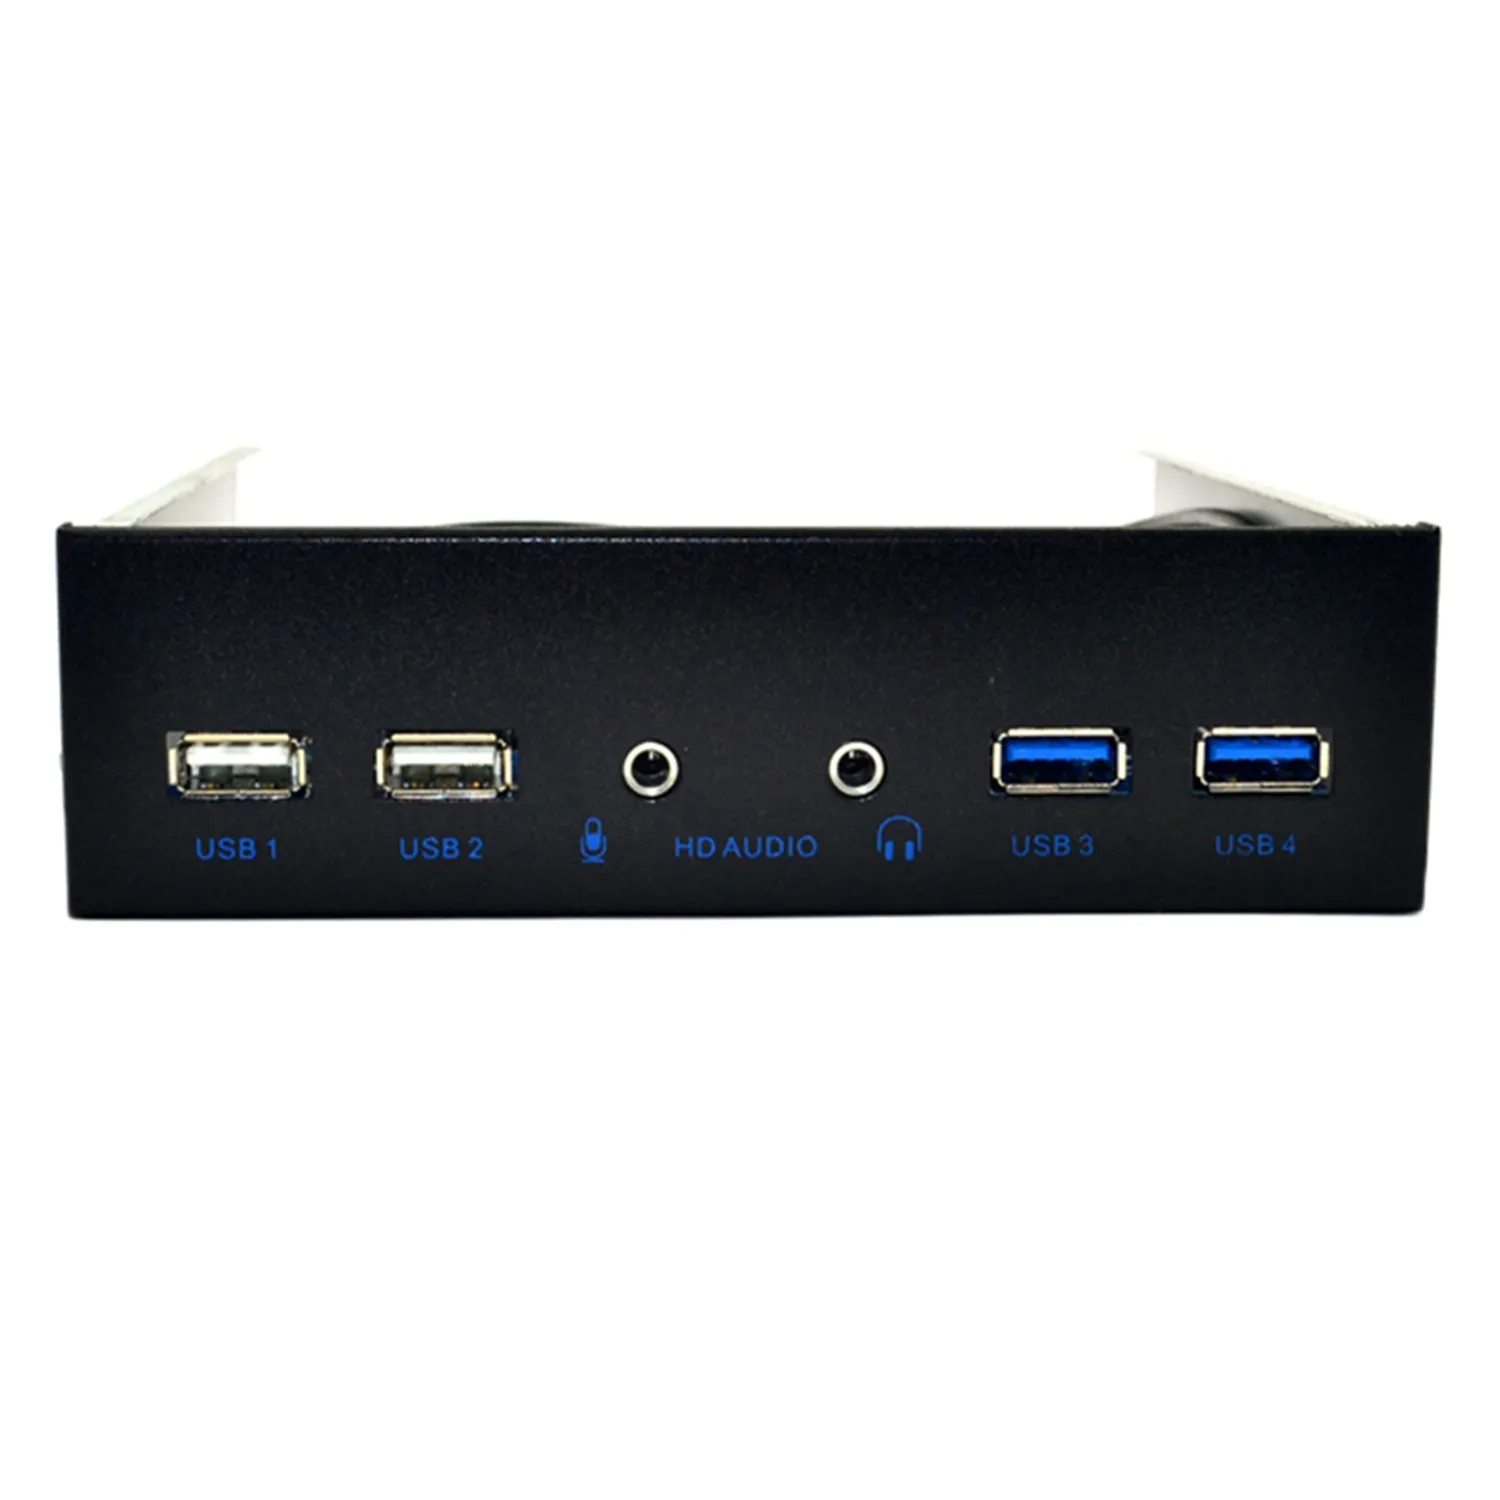 5.25 Inch Desktop Pc Case Internal Front Panel Usb Hub 2 Ports Usb 3.0 And 2 Ports Usb 2.0 With Hd Port 20 Pin Connector - Docking Stations & Usb Hubs - AliExpress